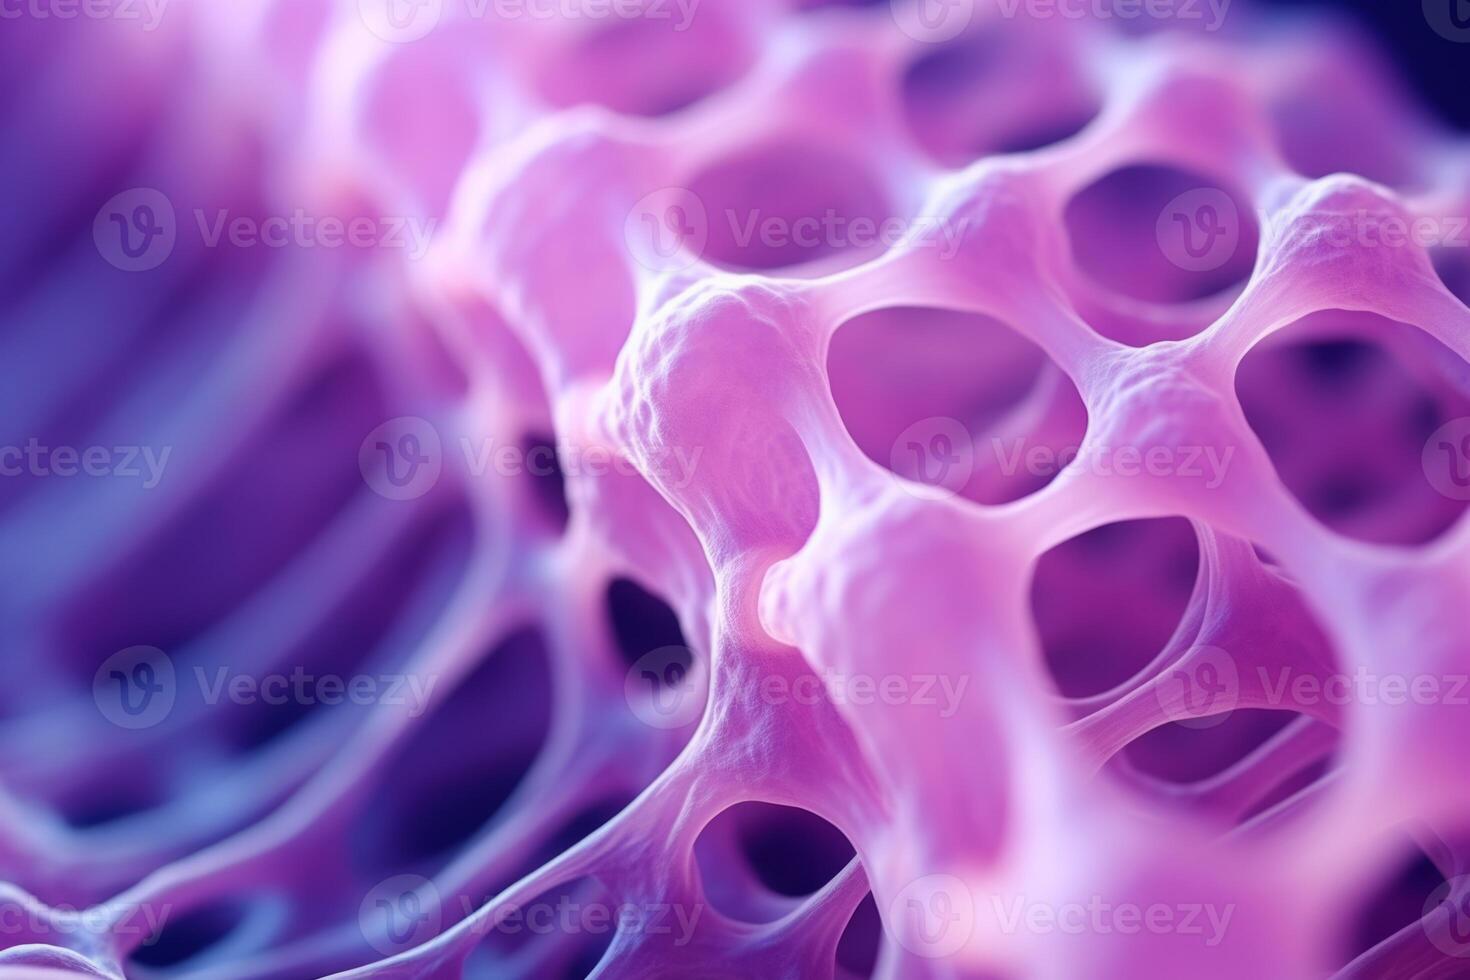 AI Generated Bone tissue human skeleton under microscope cells structure medical science biology background texture magnification research structure health microbiology internal materials organs photo